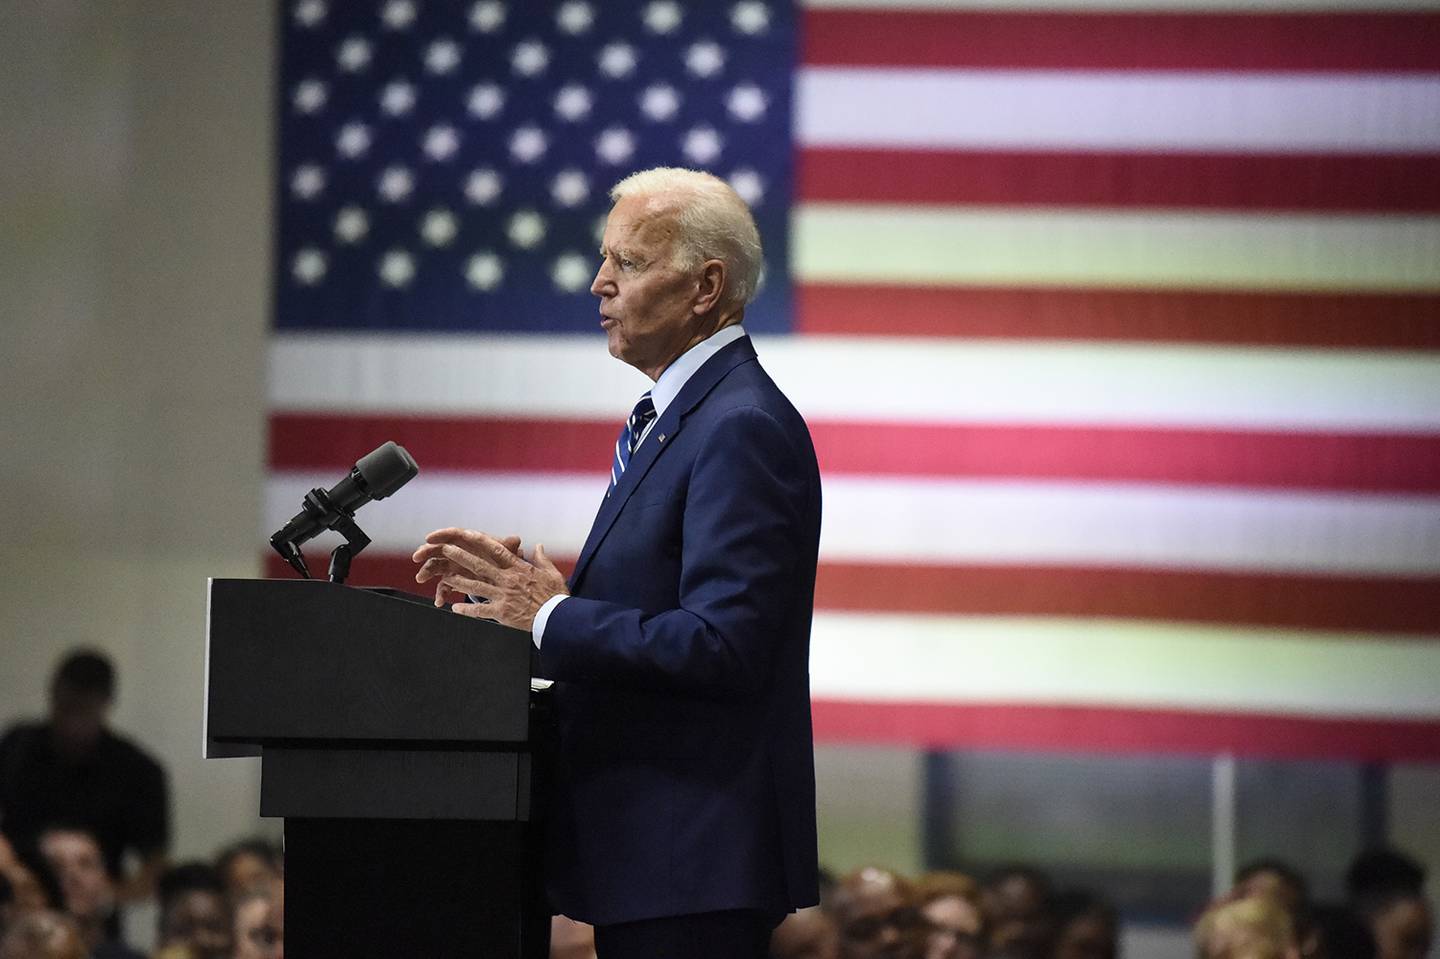 Democratic presidential candidate and former vice President Joe Biden speaks at a campaign event in Sumter, S.C, on July 6, 2019.